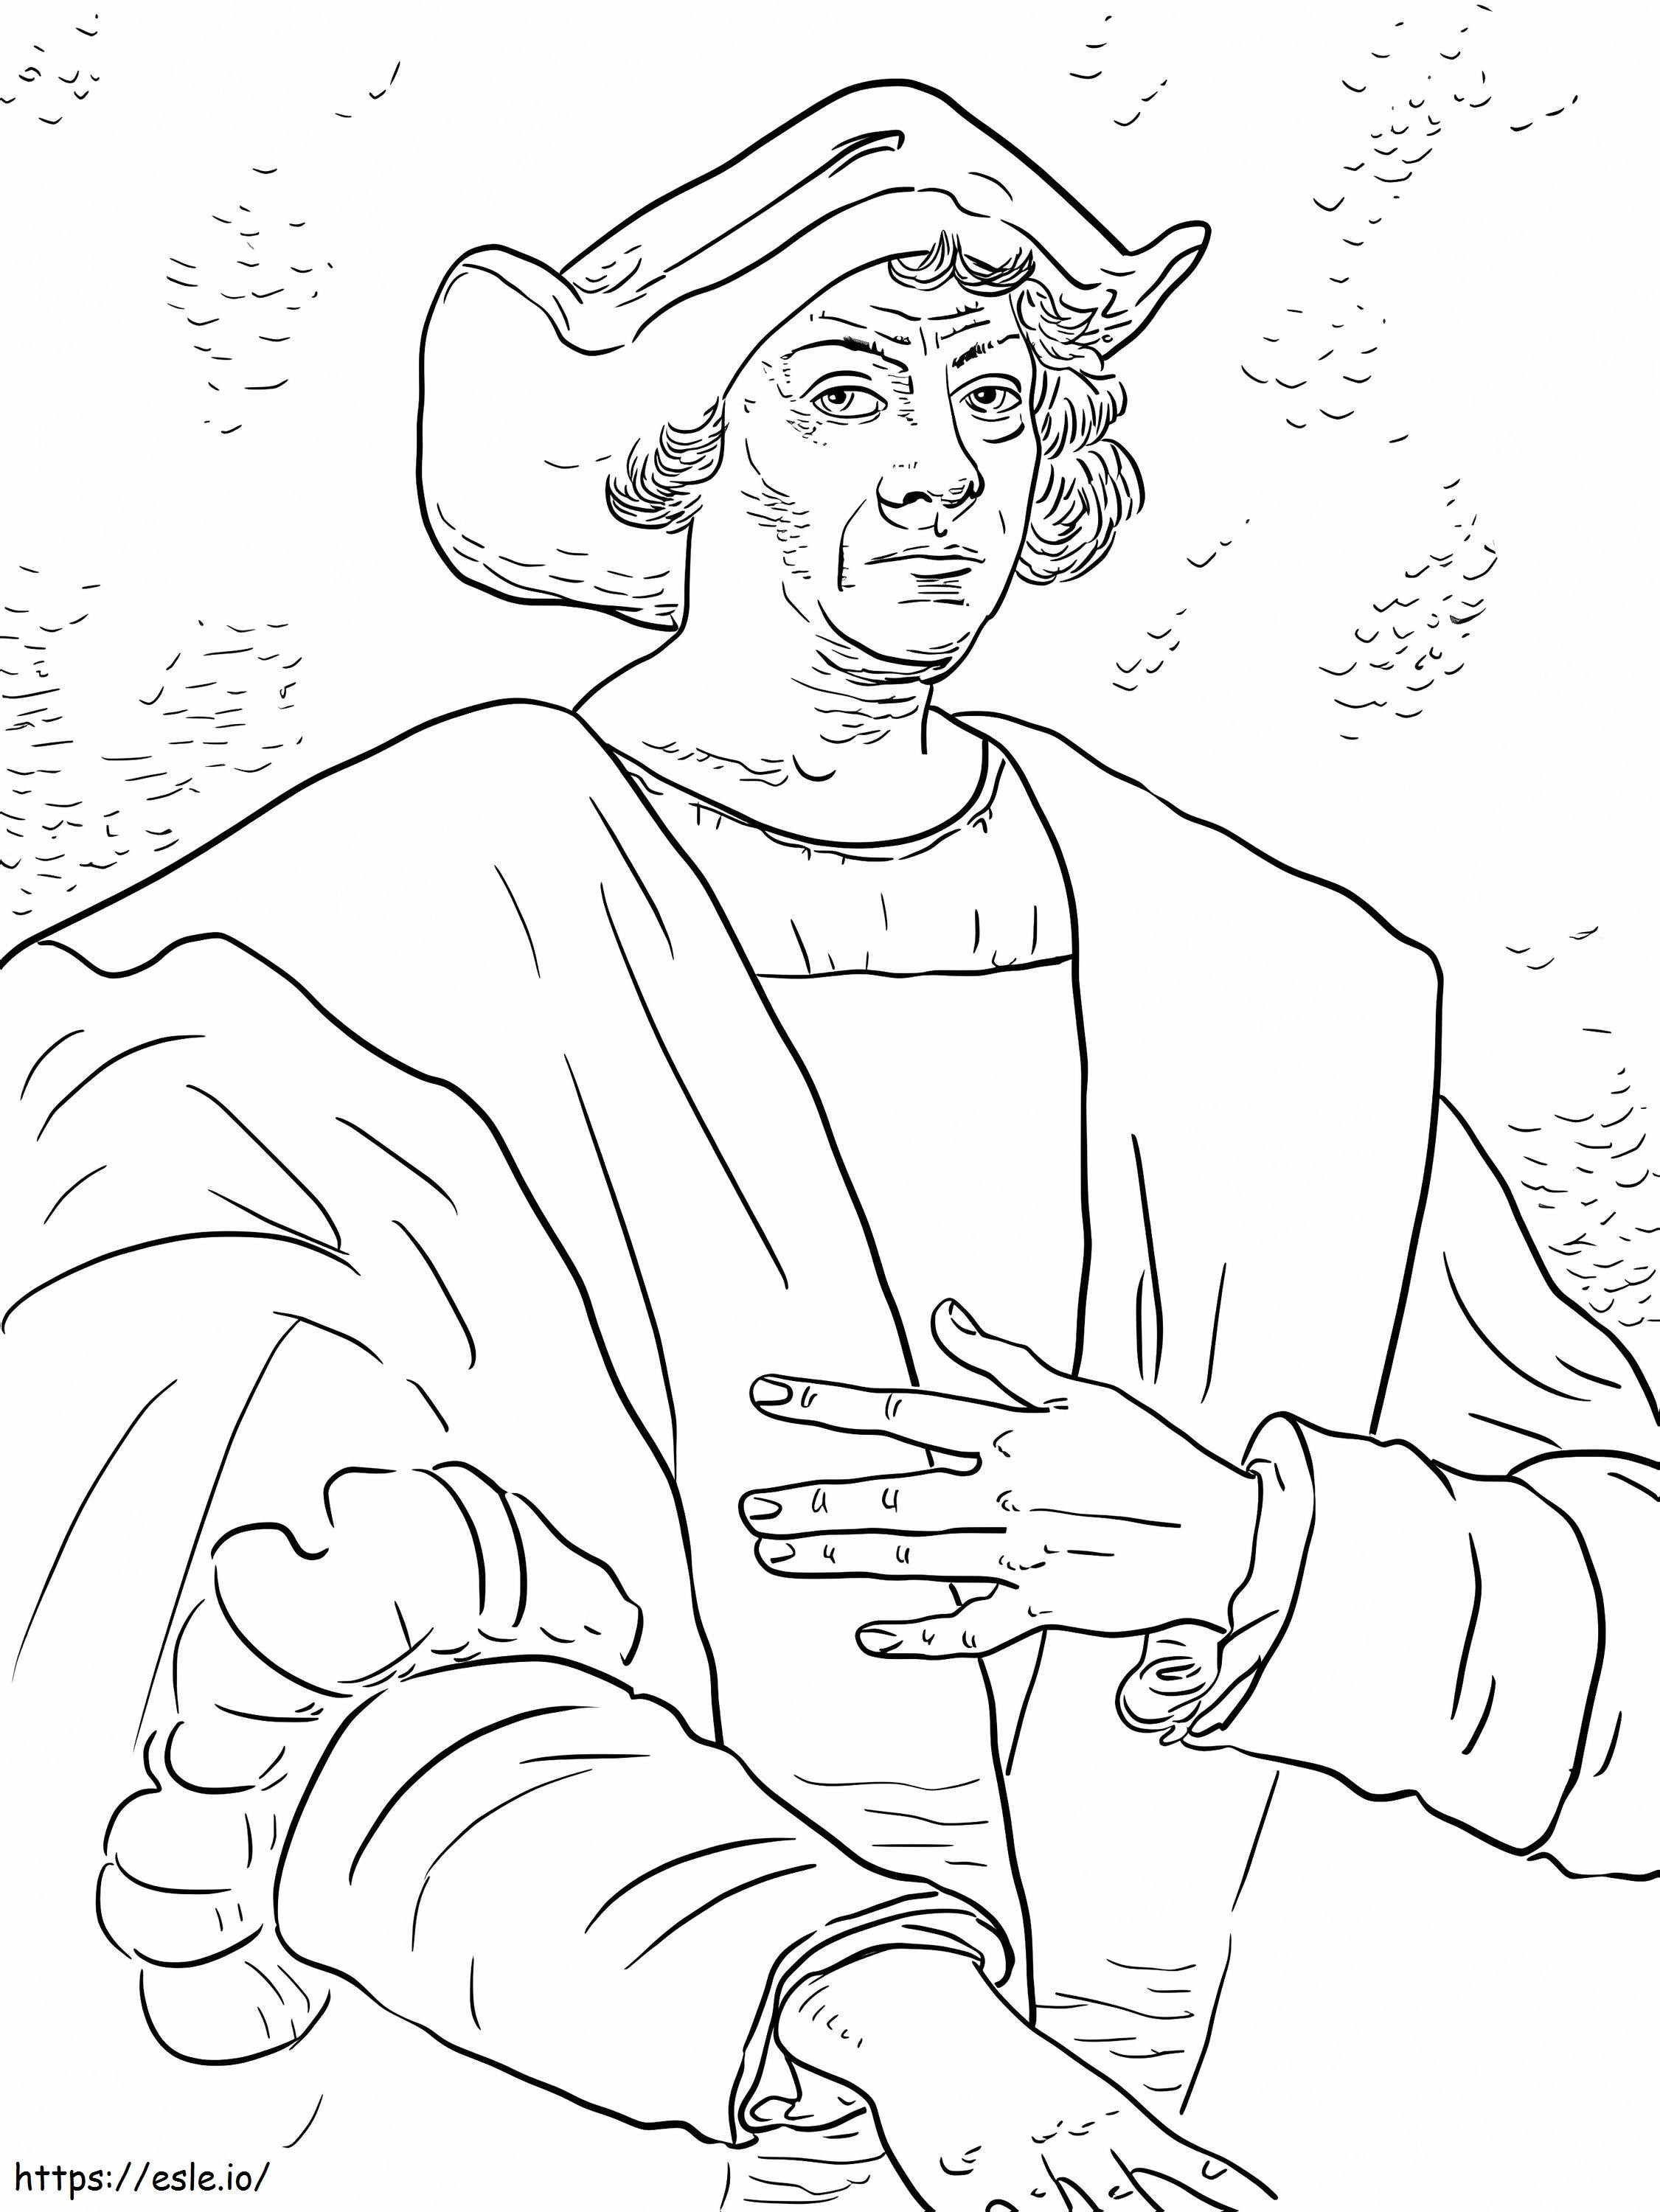 Christopher Columbus 12 coloring page